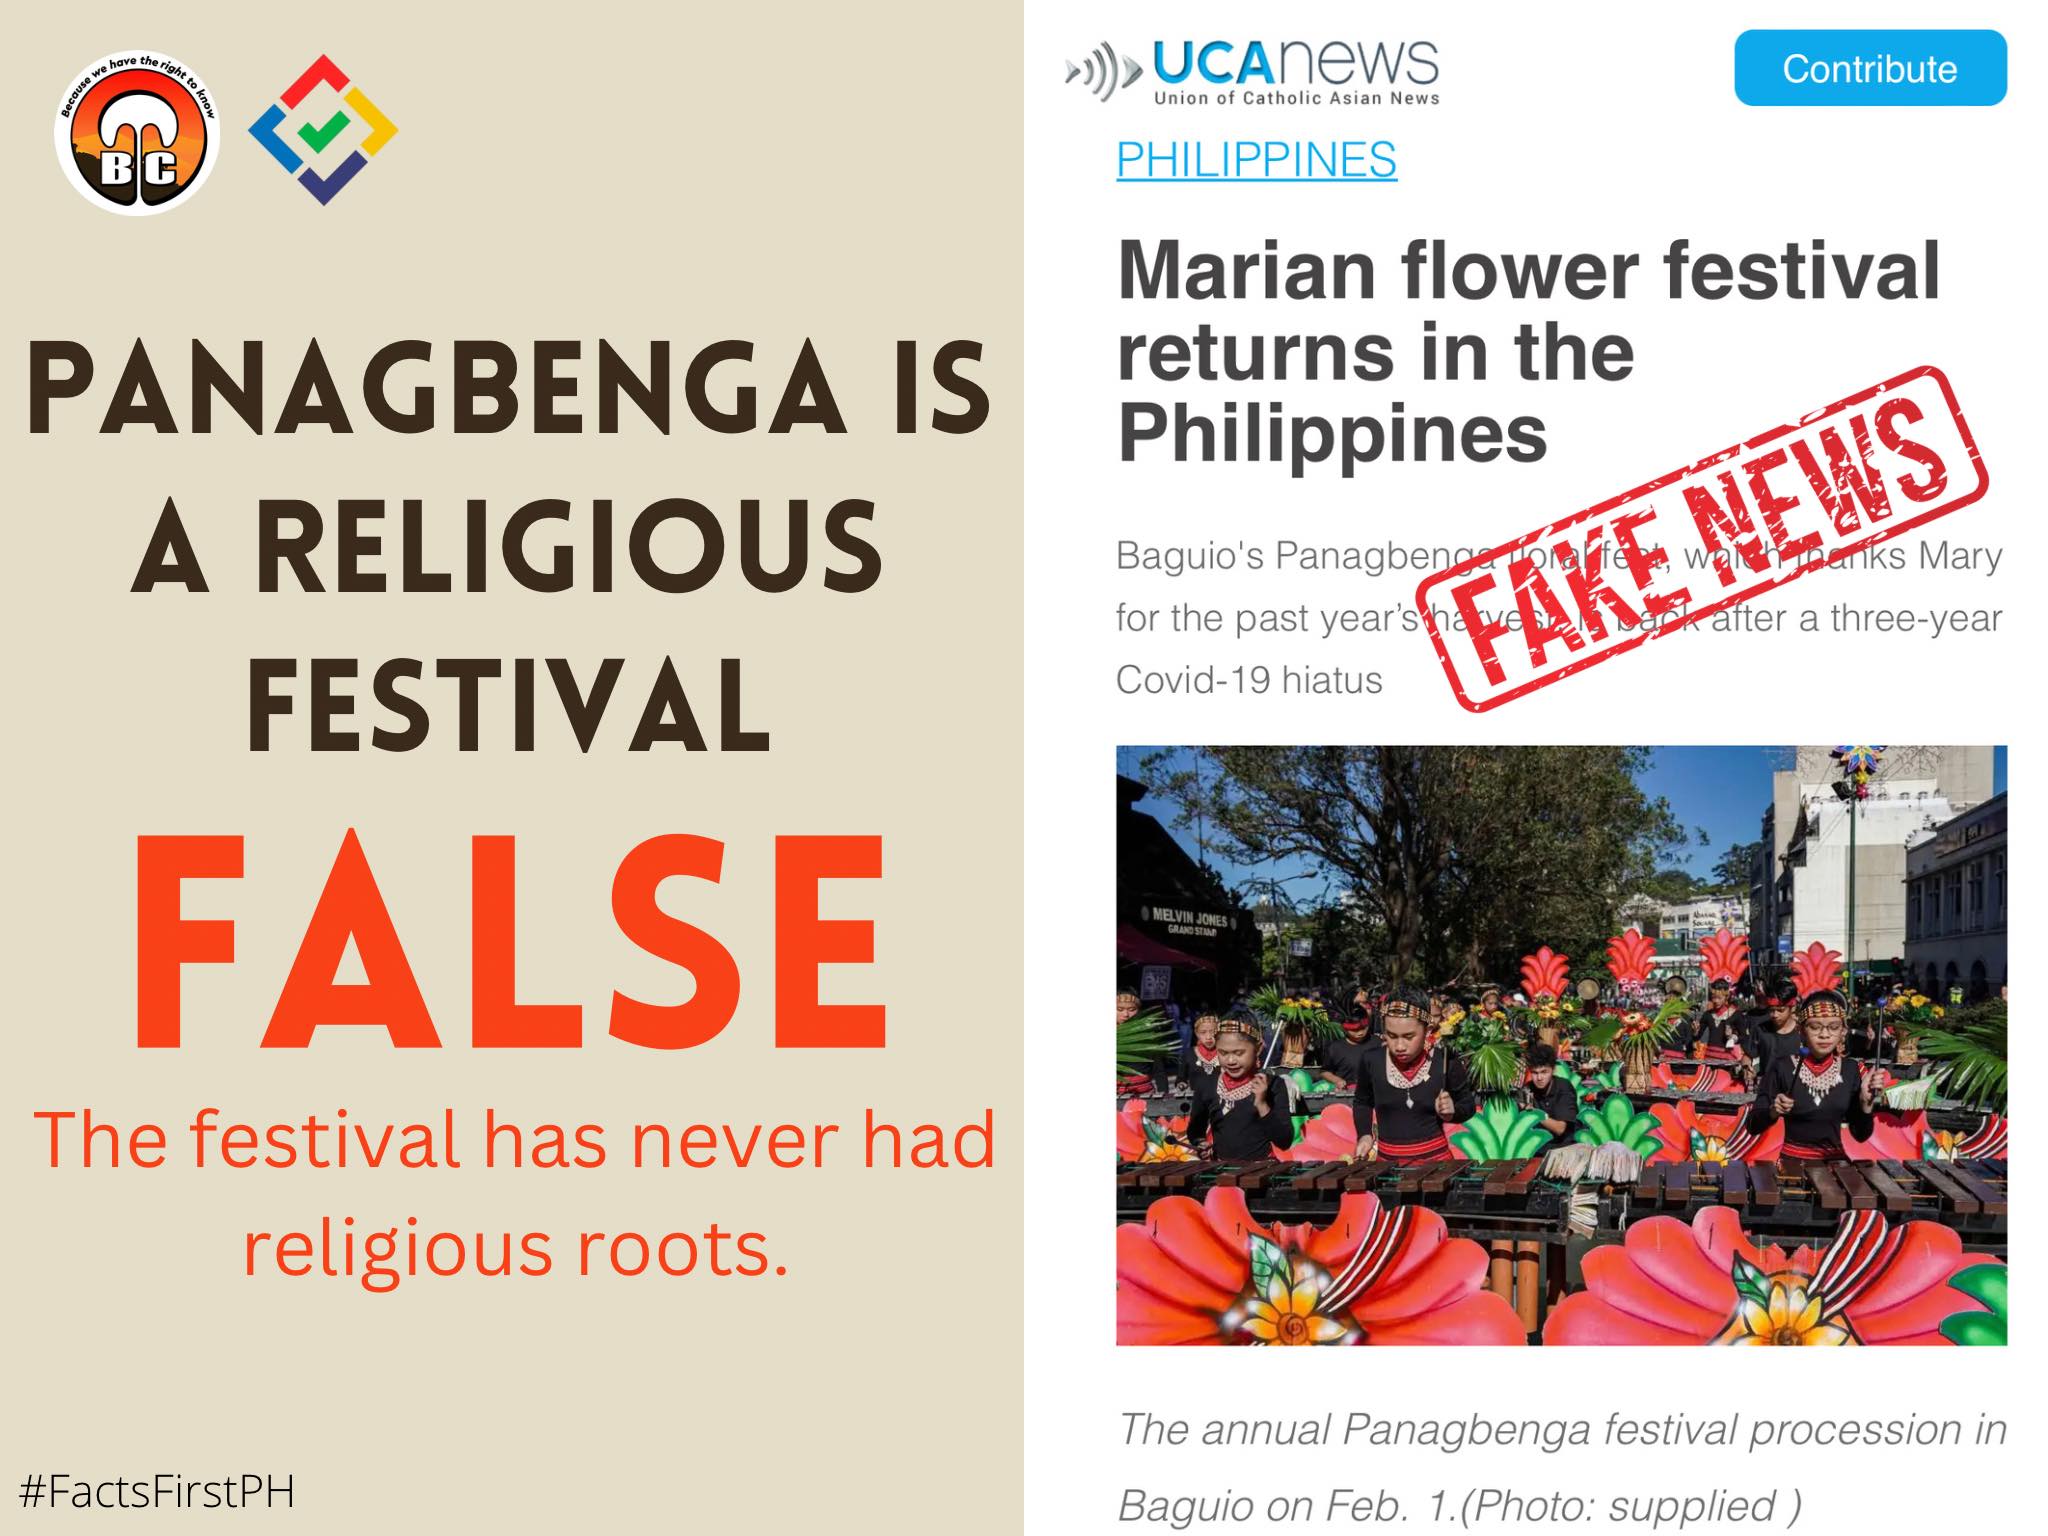 FACT CHECK: Panagbenga is a religious festival #FactsFirstPH